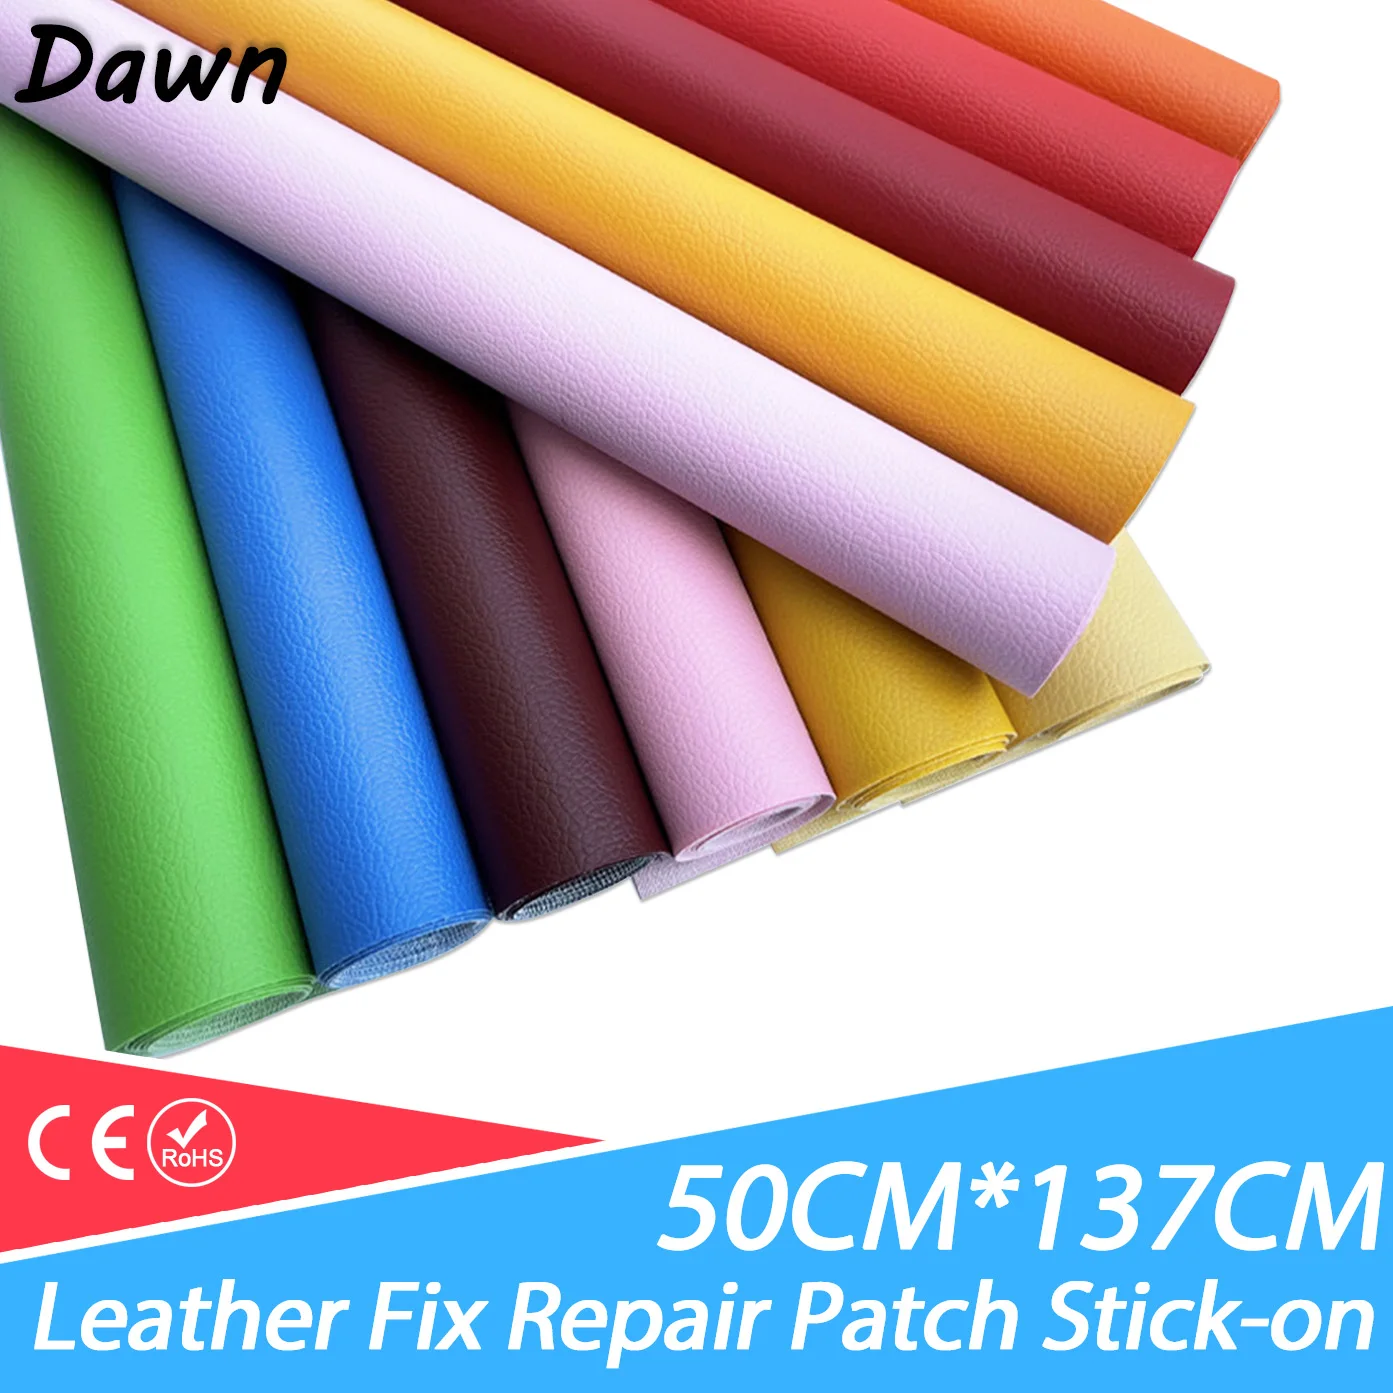 Self Adhesive Leather Fix Repair Patch Stick-on Sofa Car seat Repairing Subsidies Leather PU Fabric Stickers Patches Waterproof